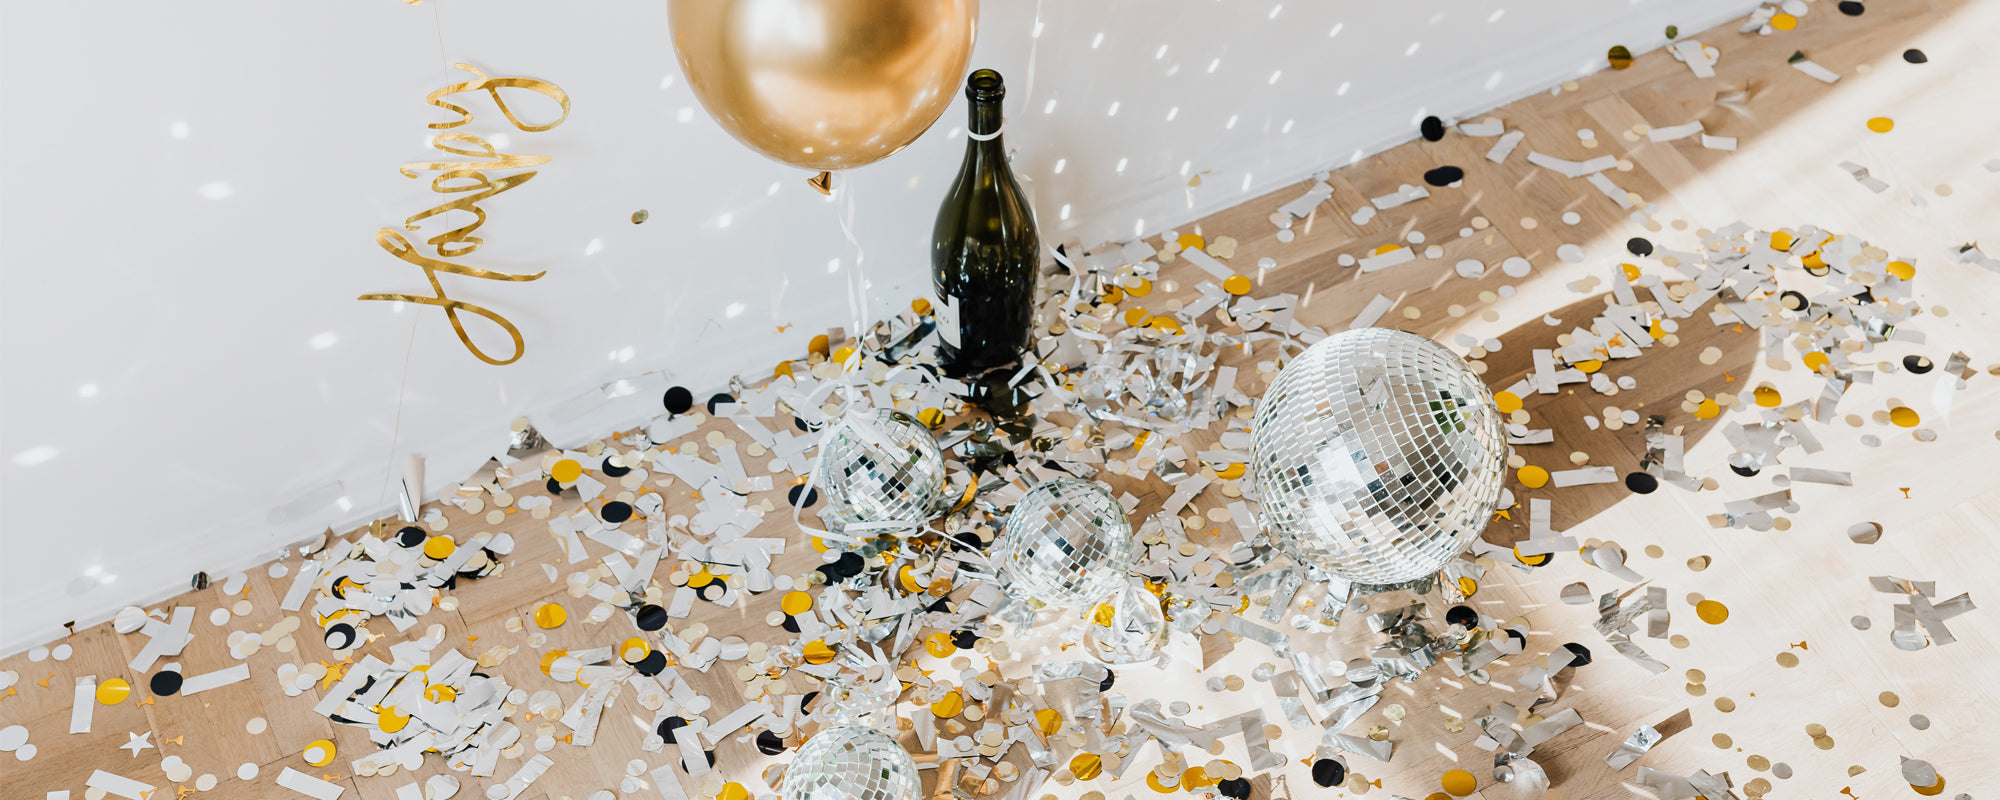 Top 7 New Year’s Eve Proposal Ideas